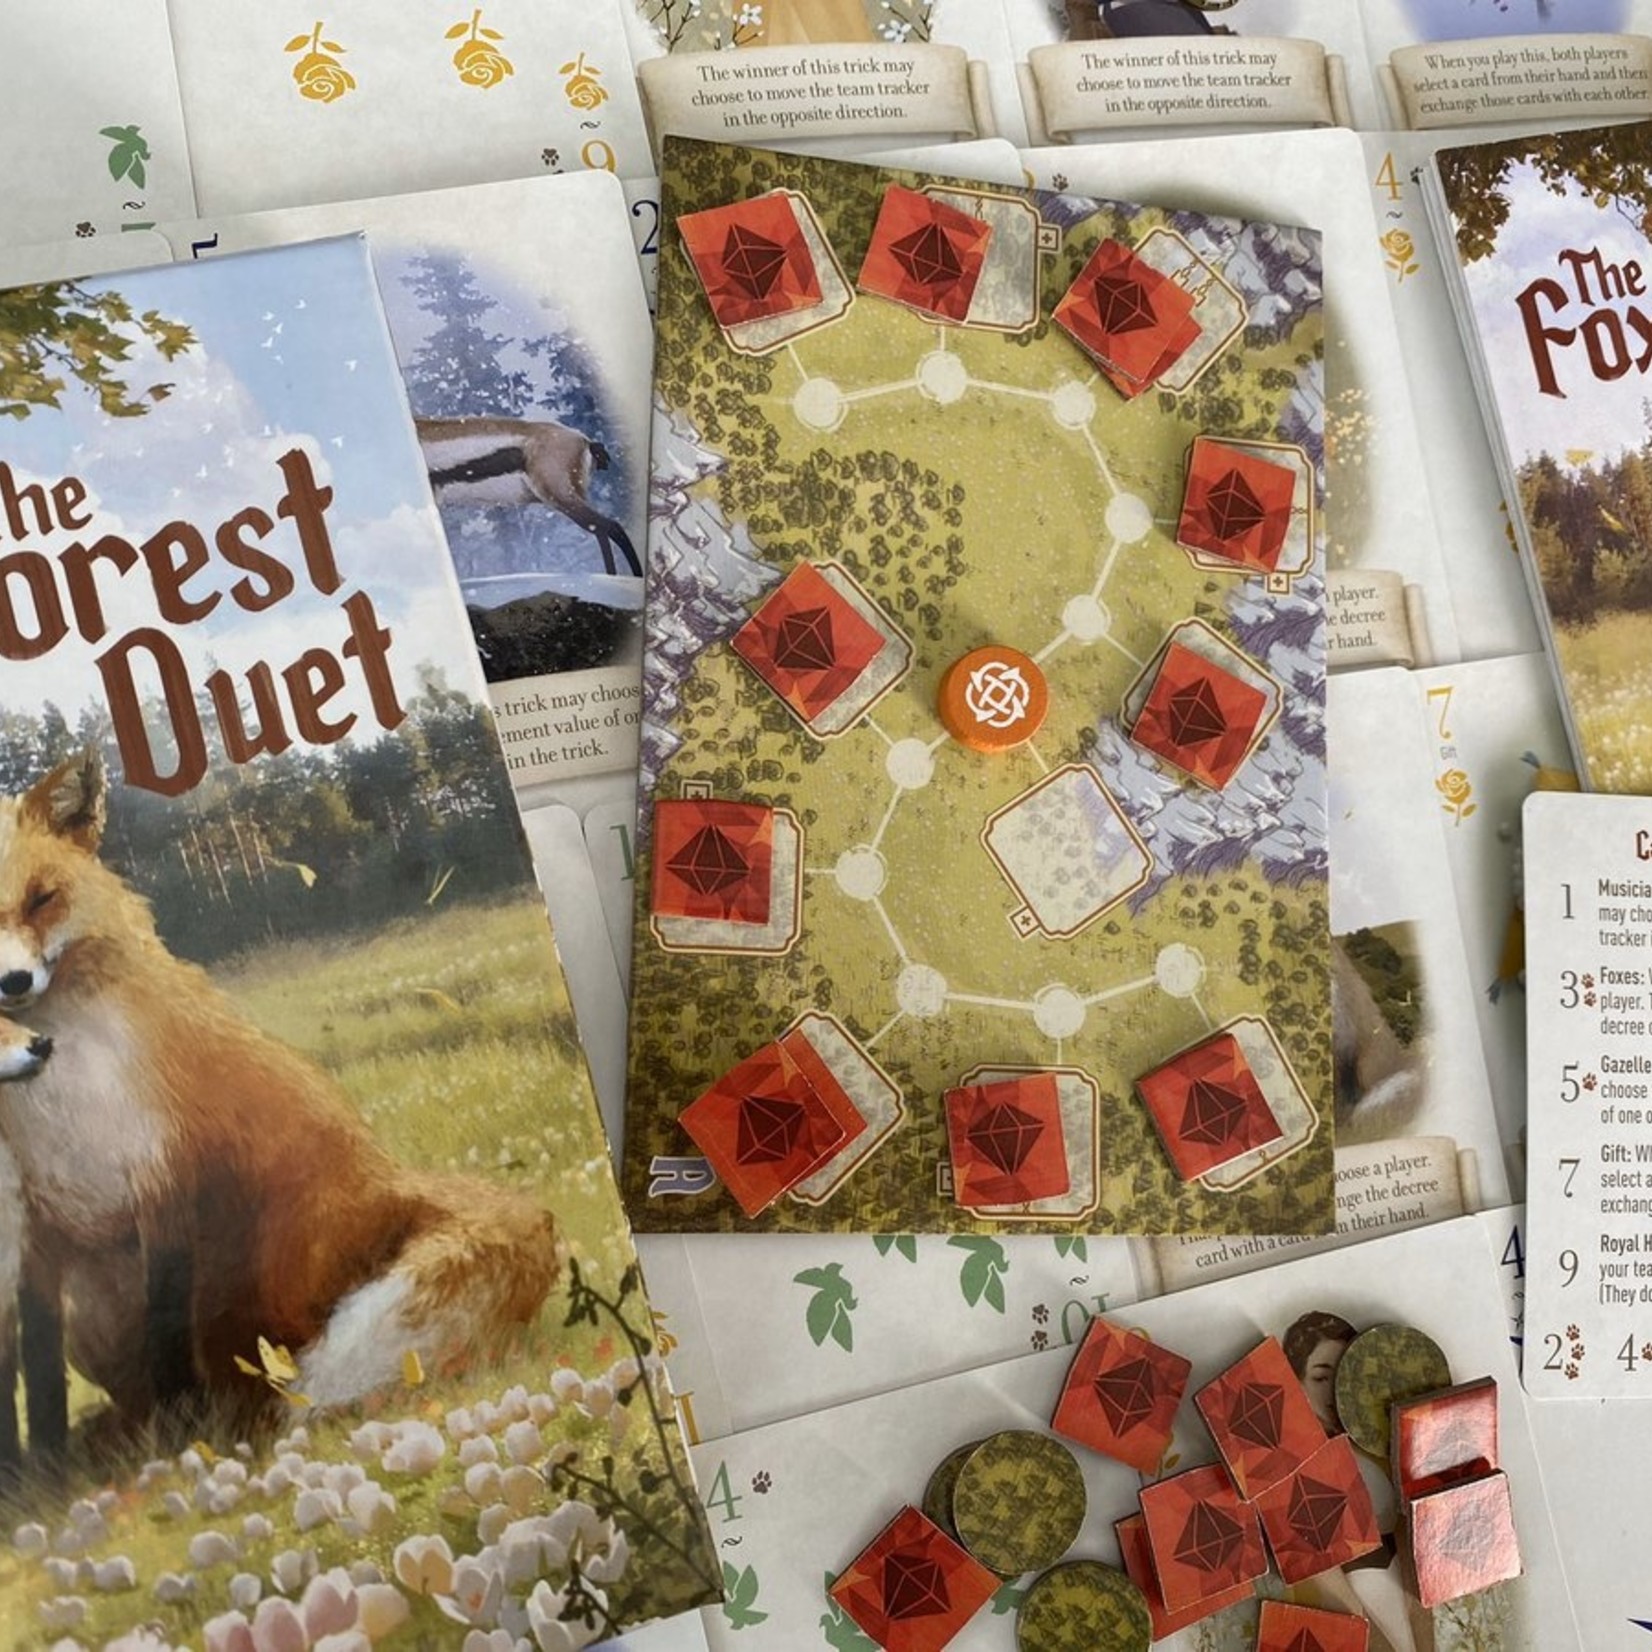 Renegade Game Studios The Fox in the Forest Duet